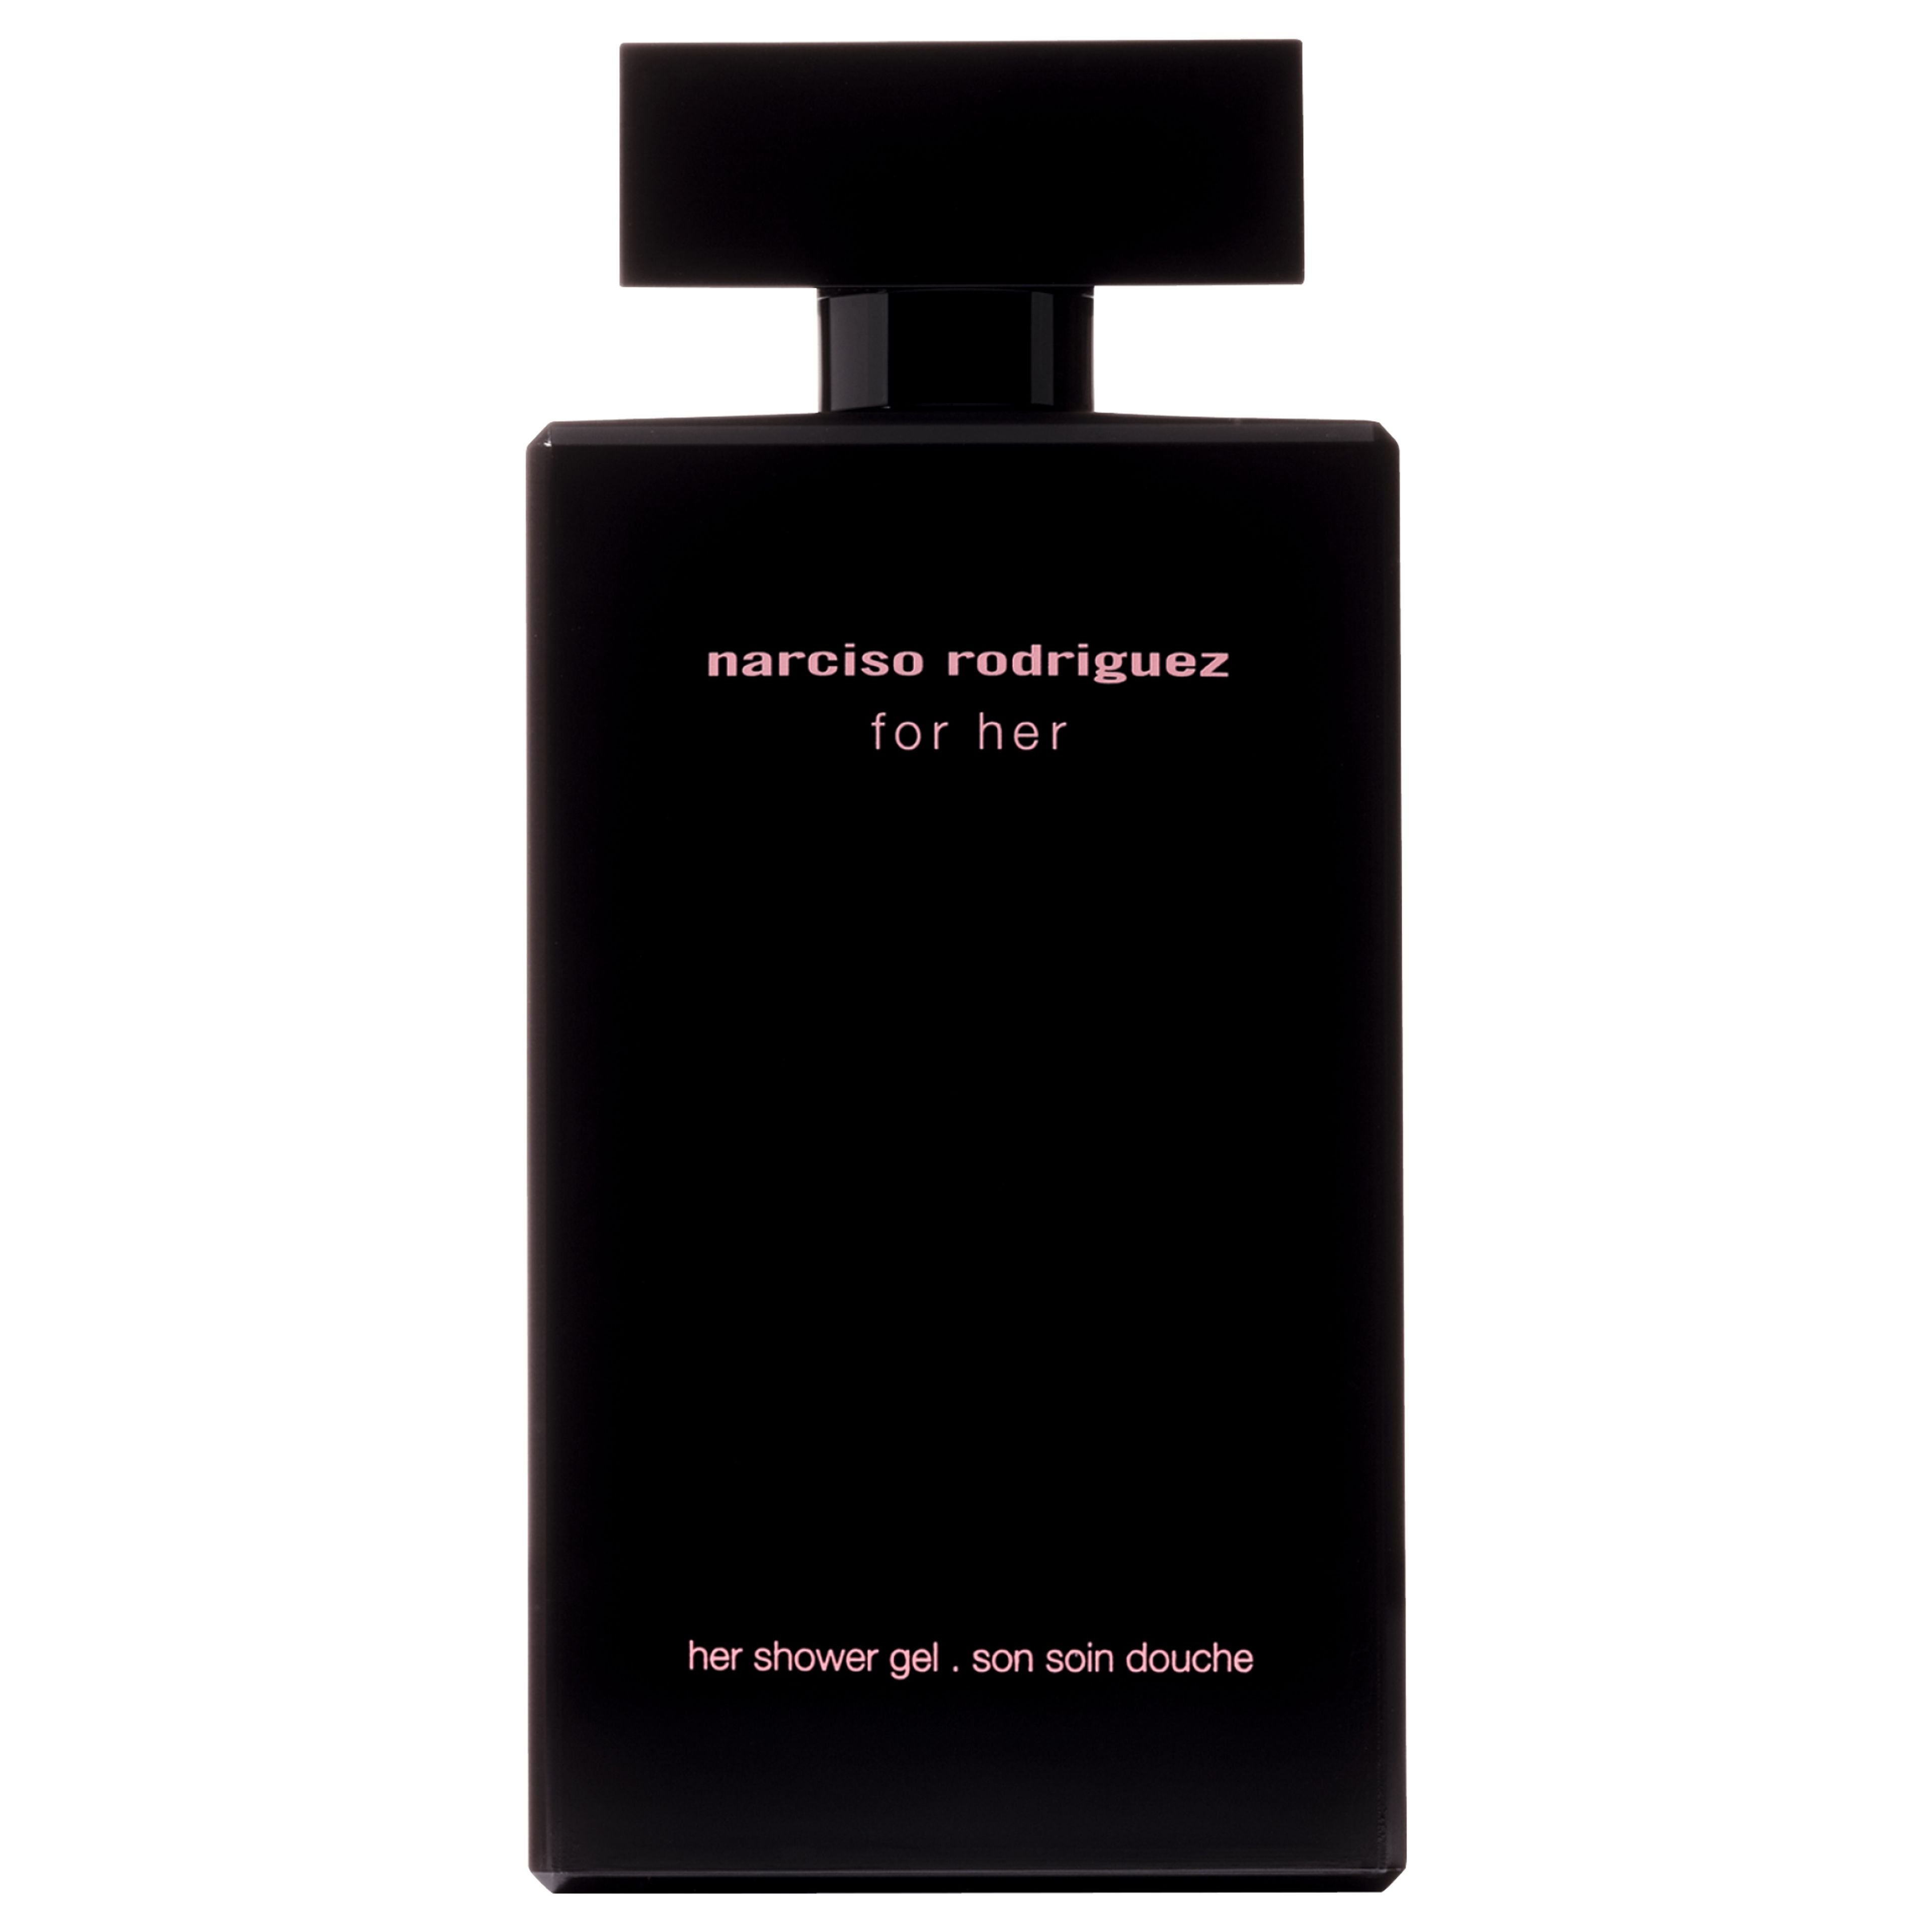 For Her Shower Gel 200ml Narciso Rodriguez 1